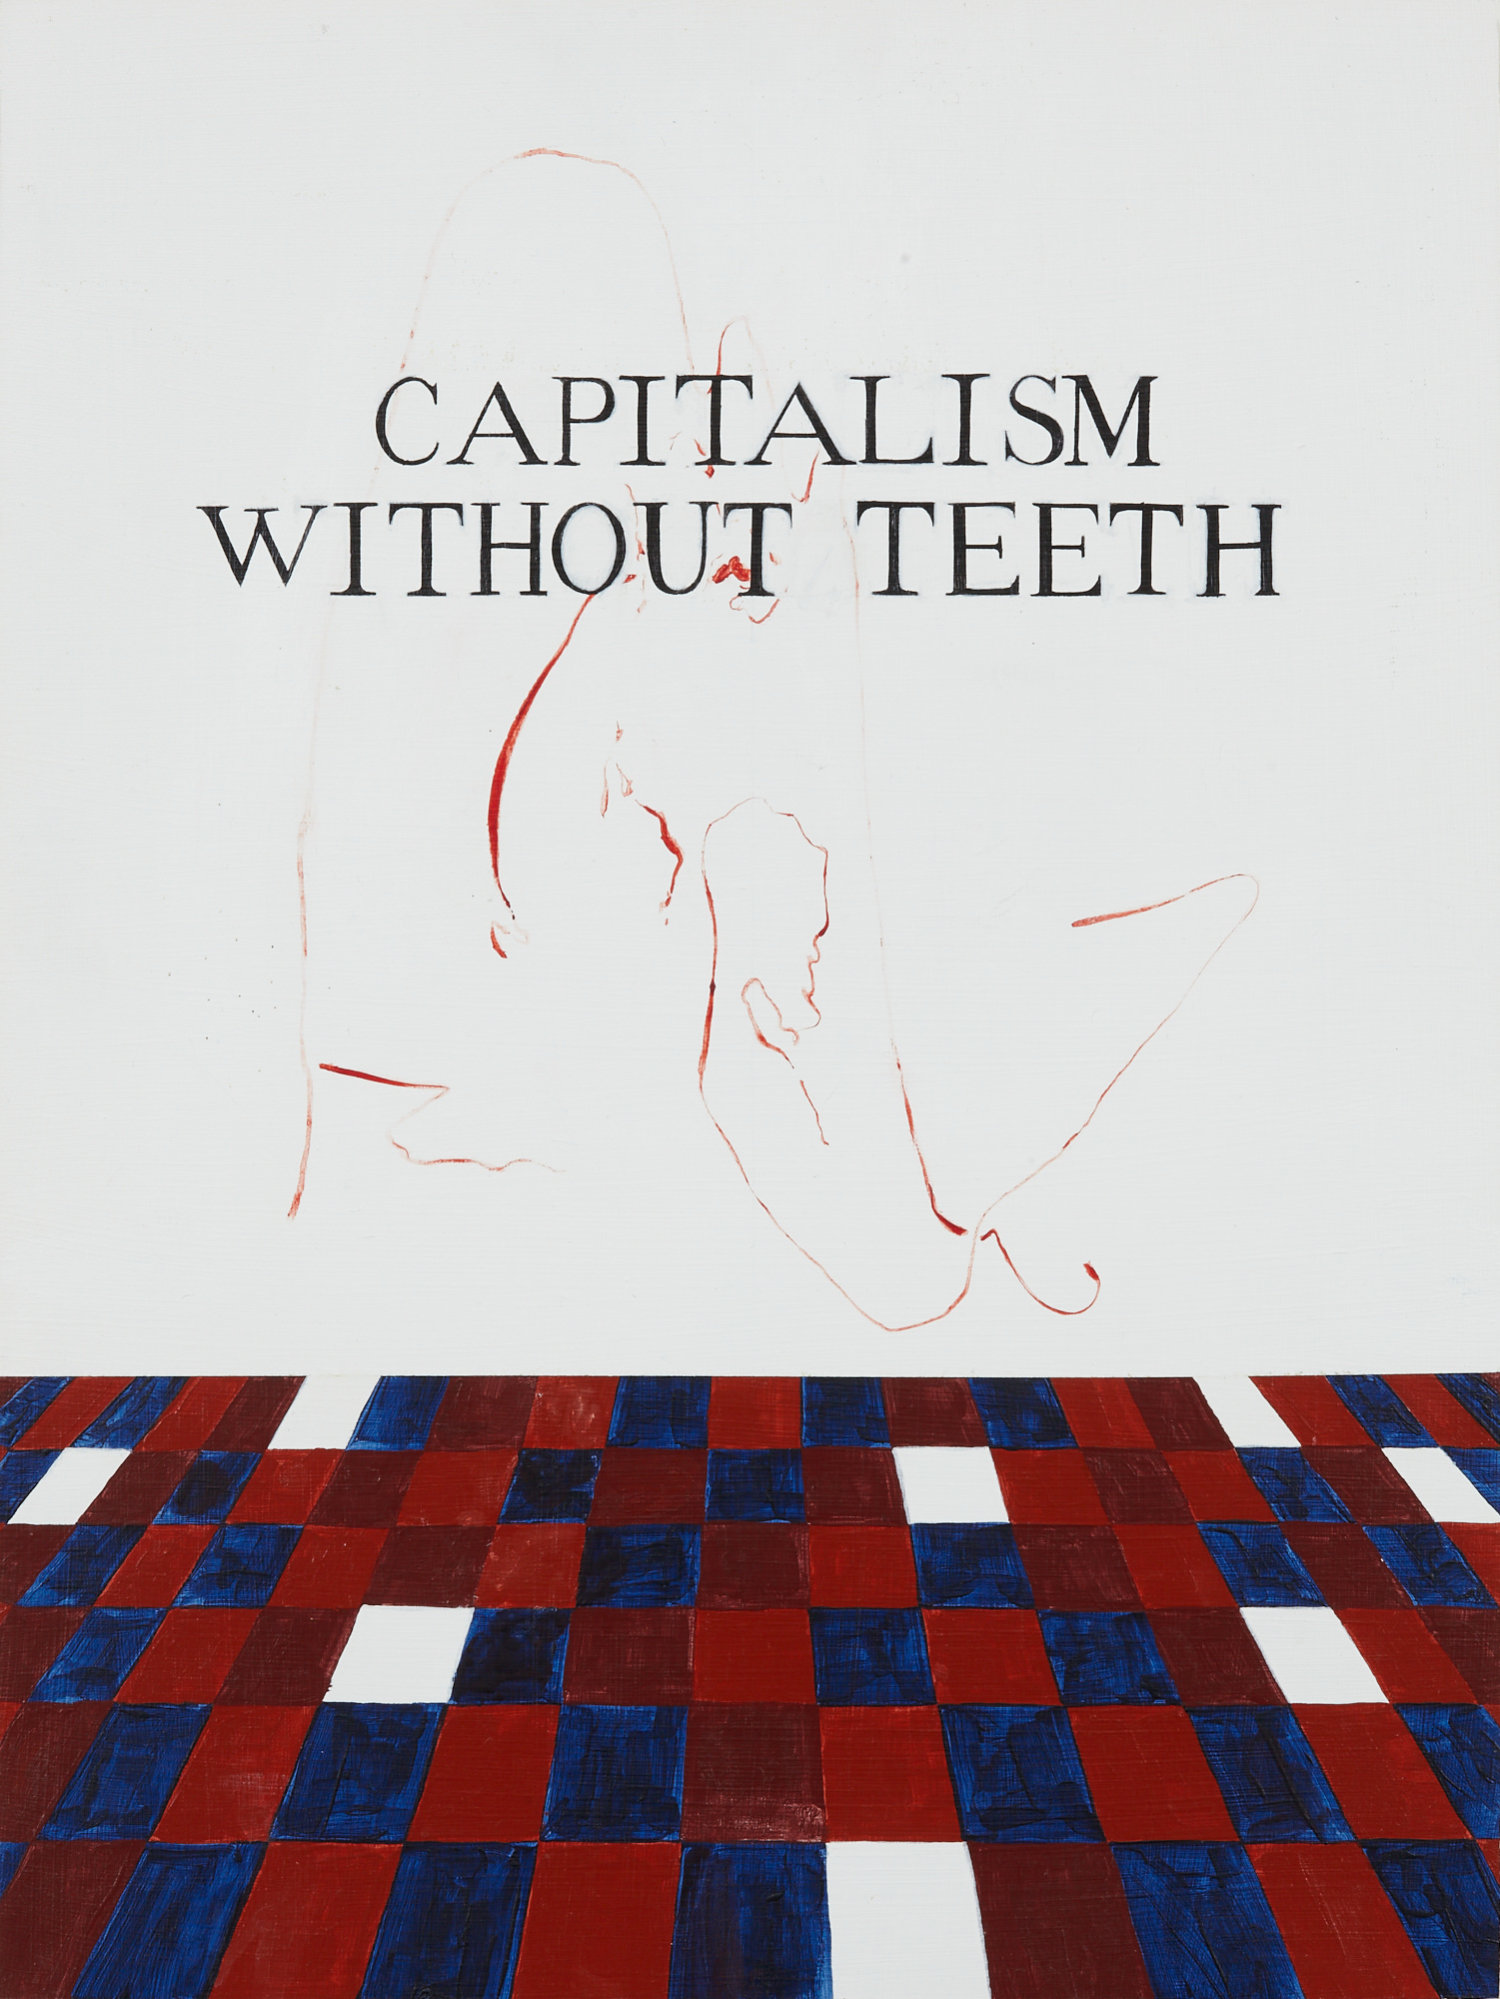 Capitalism without teeth